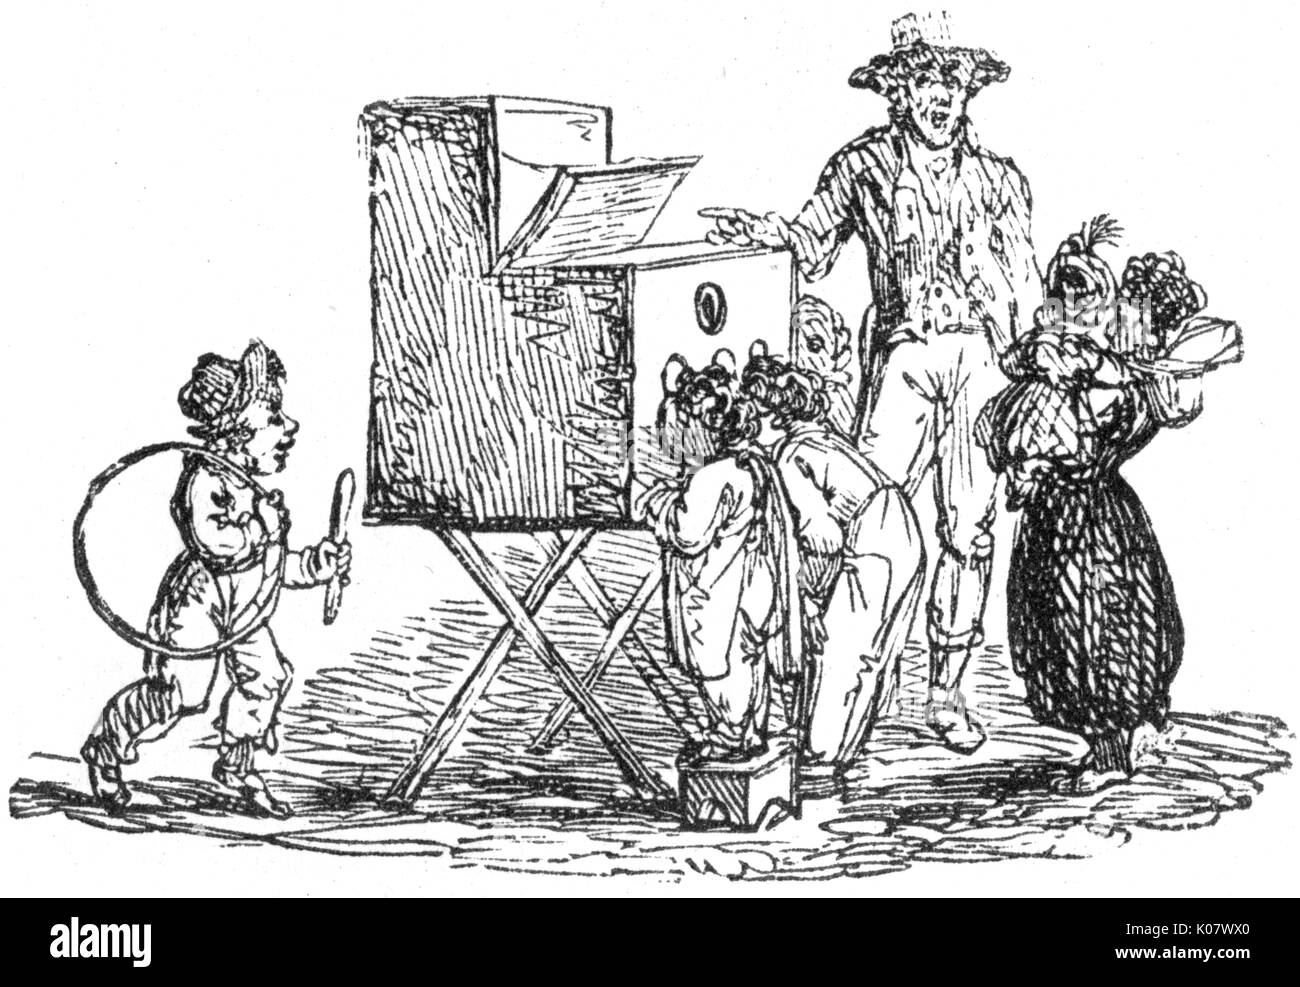 Children looking into a peep box device, c.1810.      Date: C.1810 Stock Photo